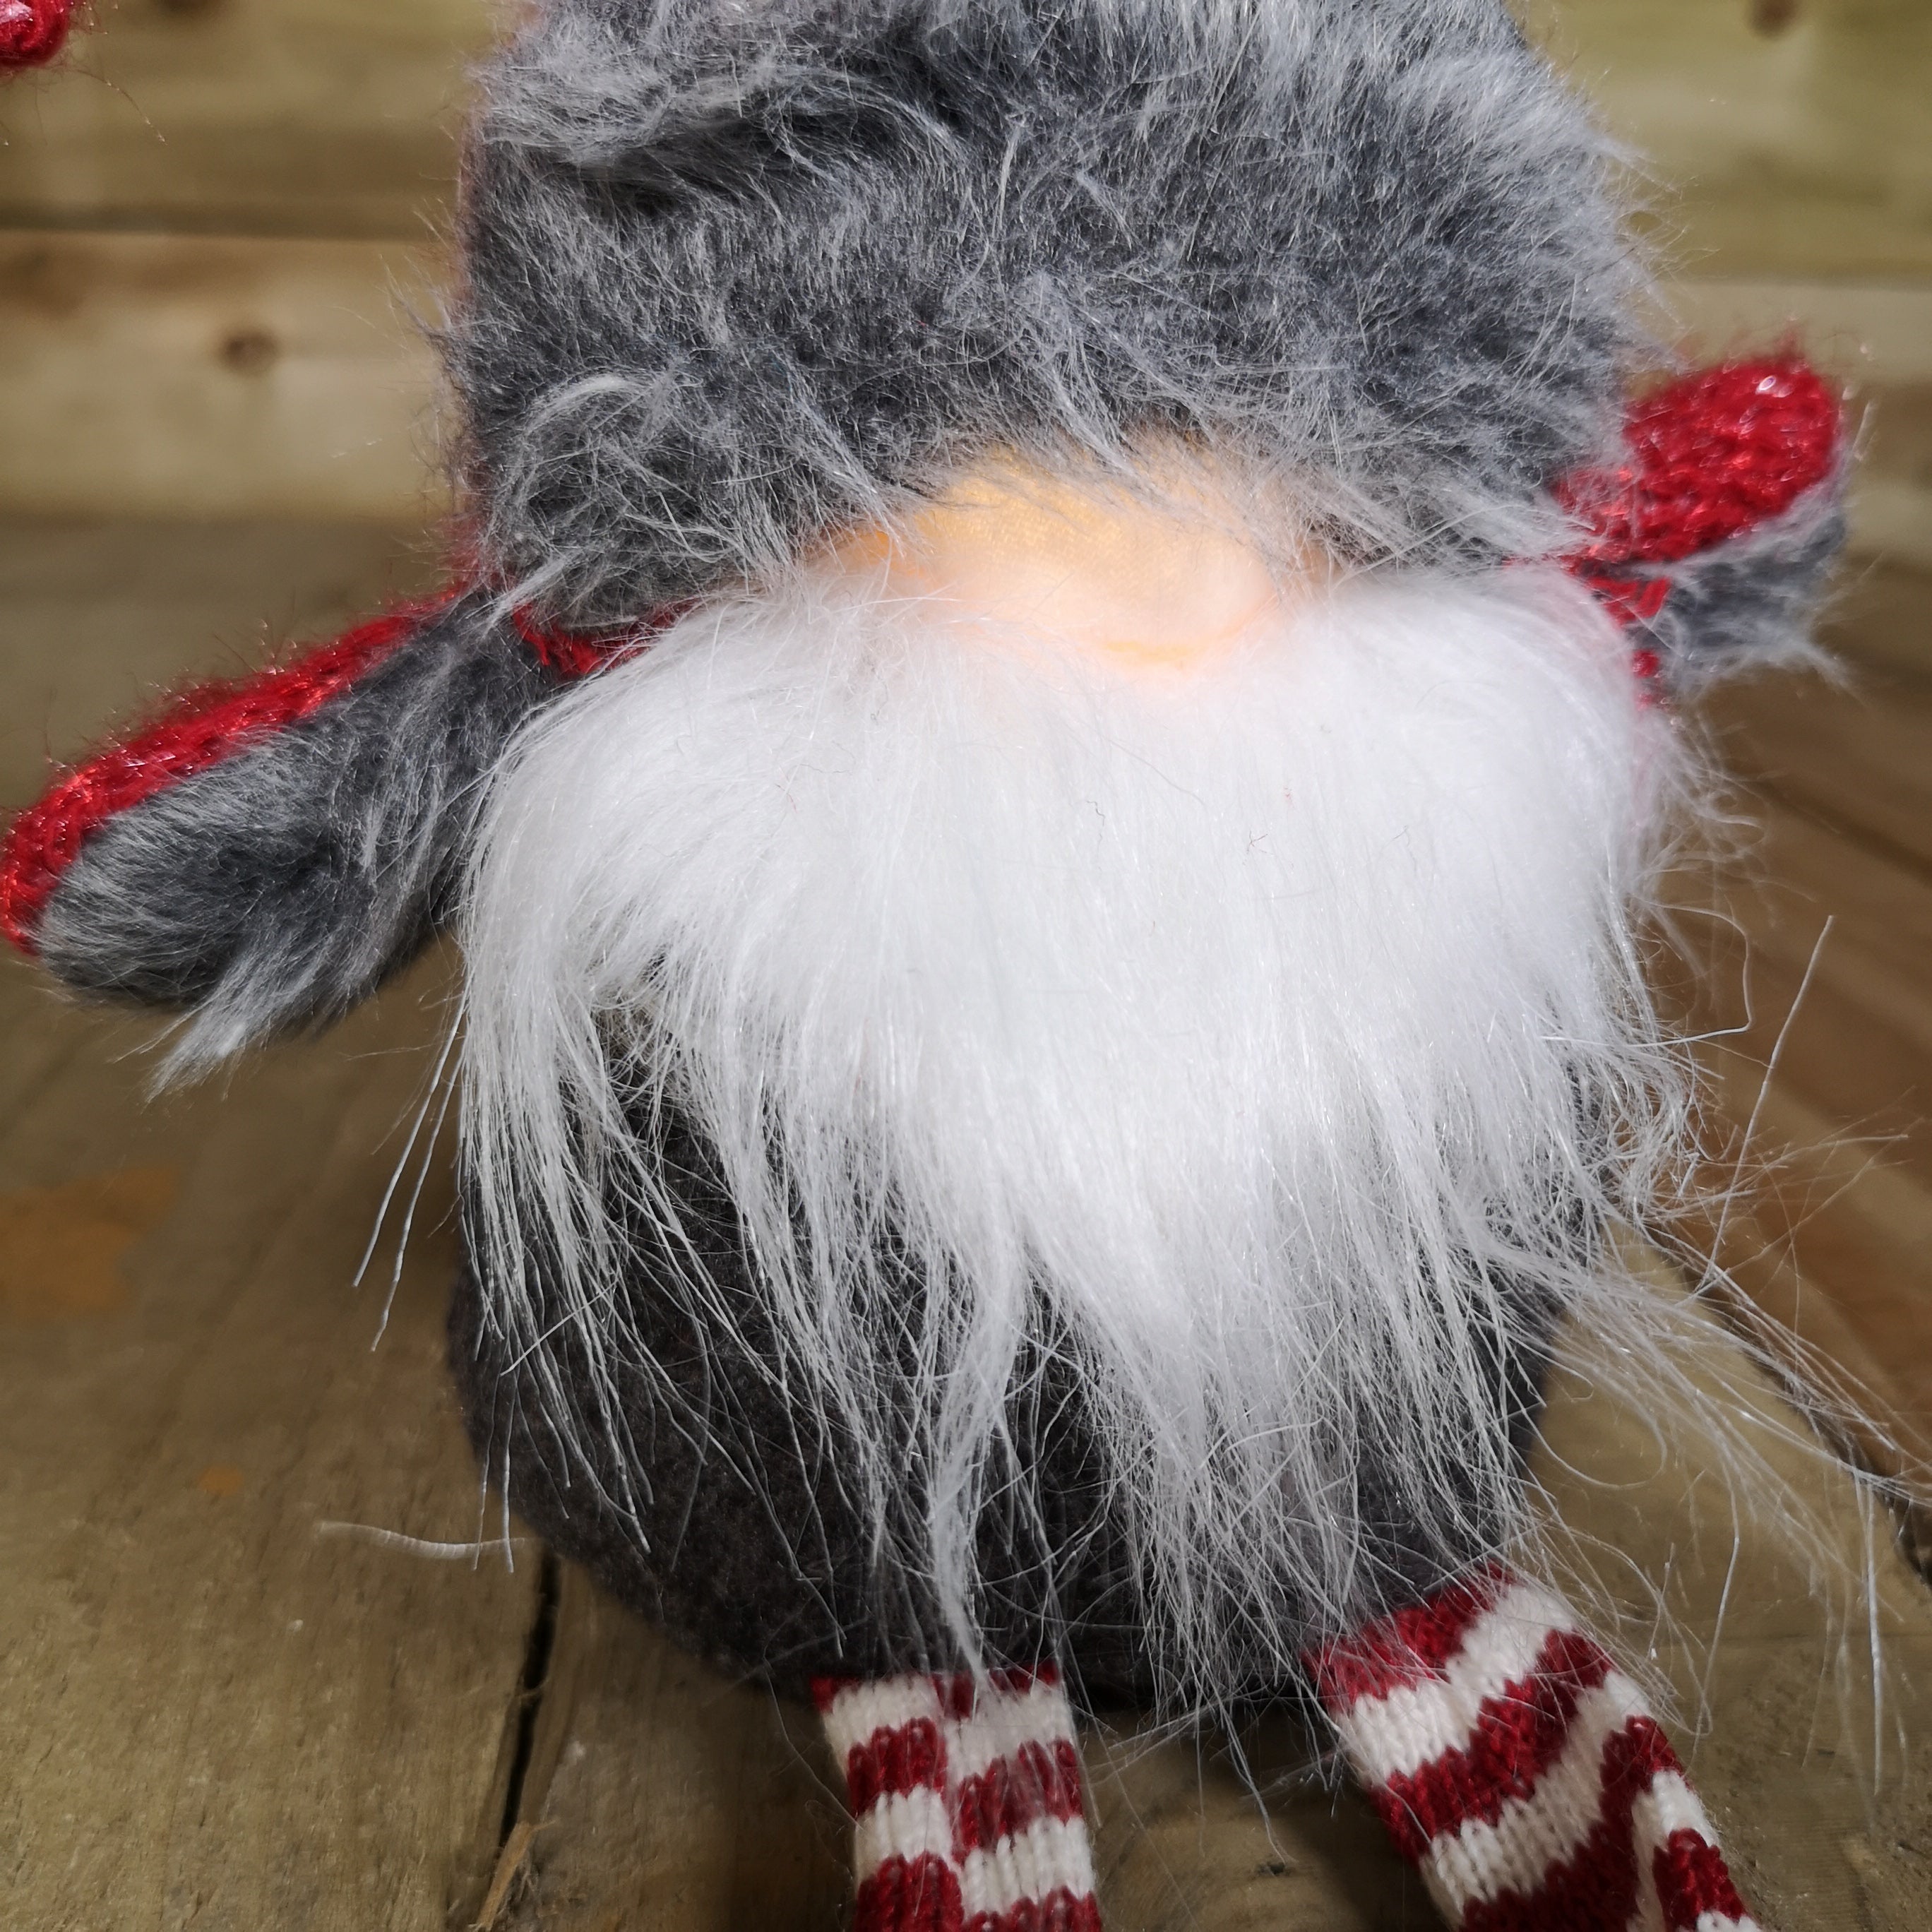 72cm Lit Plush Christmas Gonk with Dangly Legs & Aviator Hat in Red & Grey